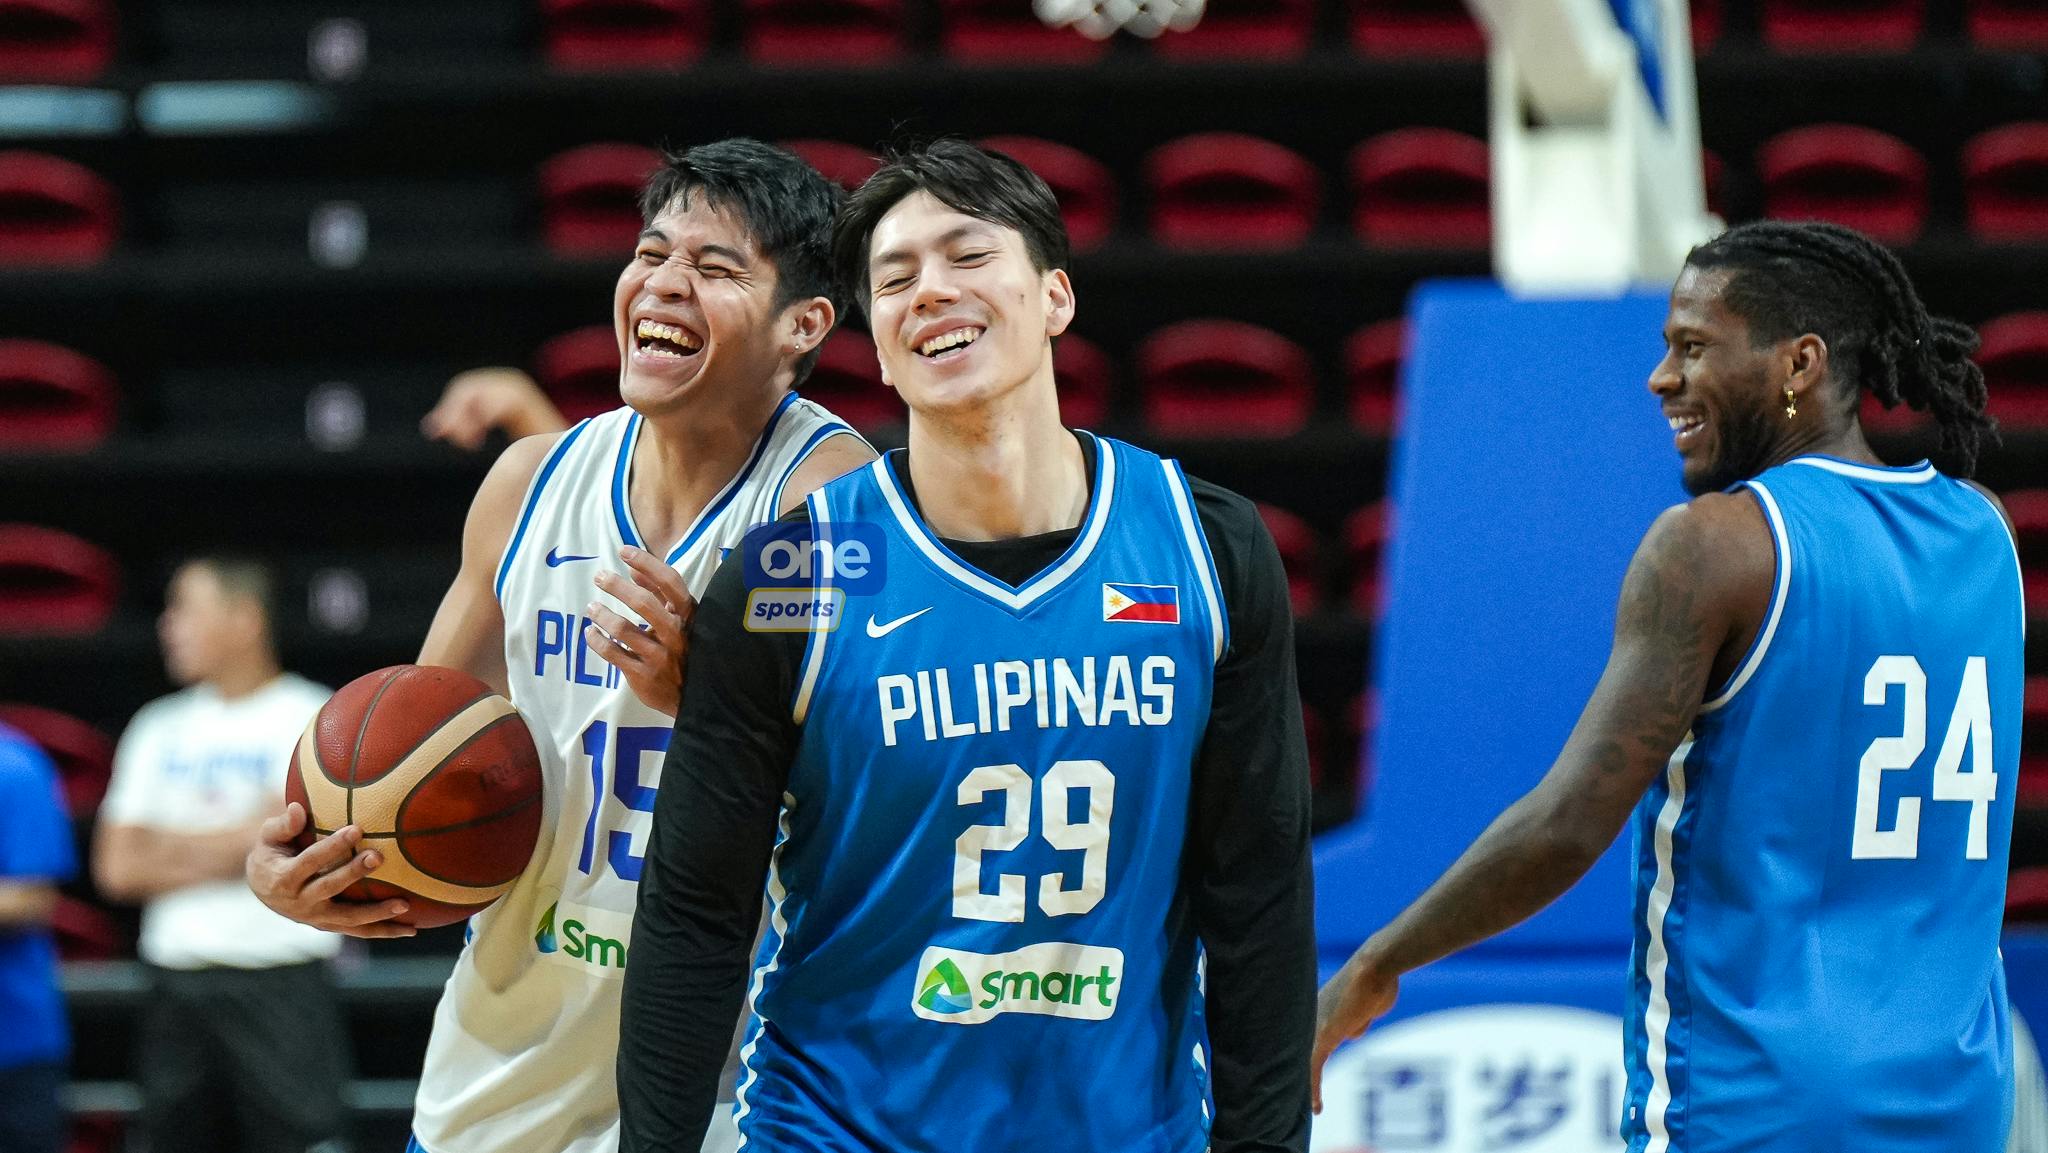 Dwight Ramos excited for Gilas Pilipinas build-up under Tim Cone